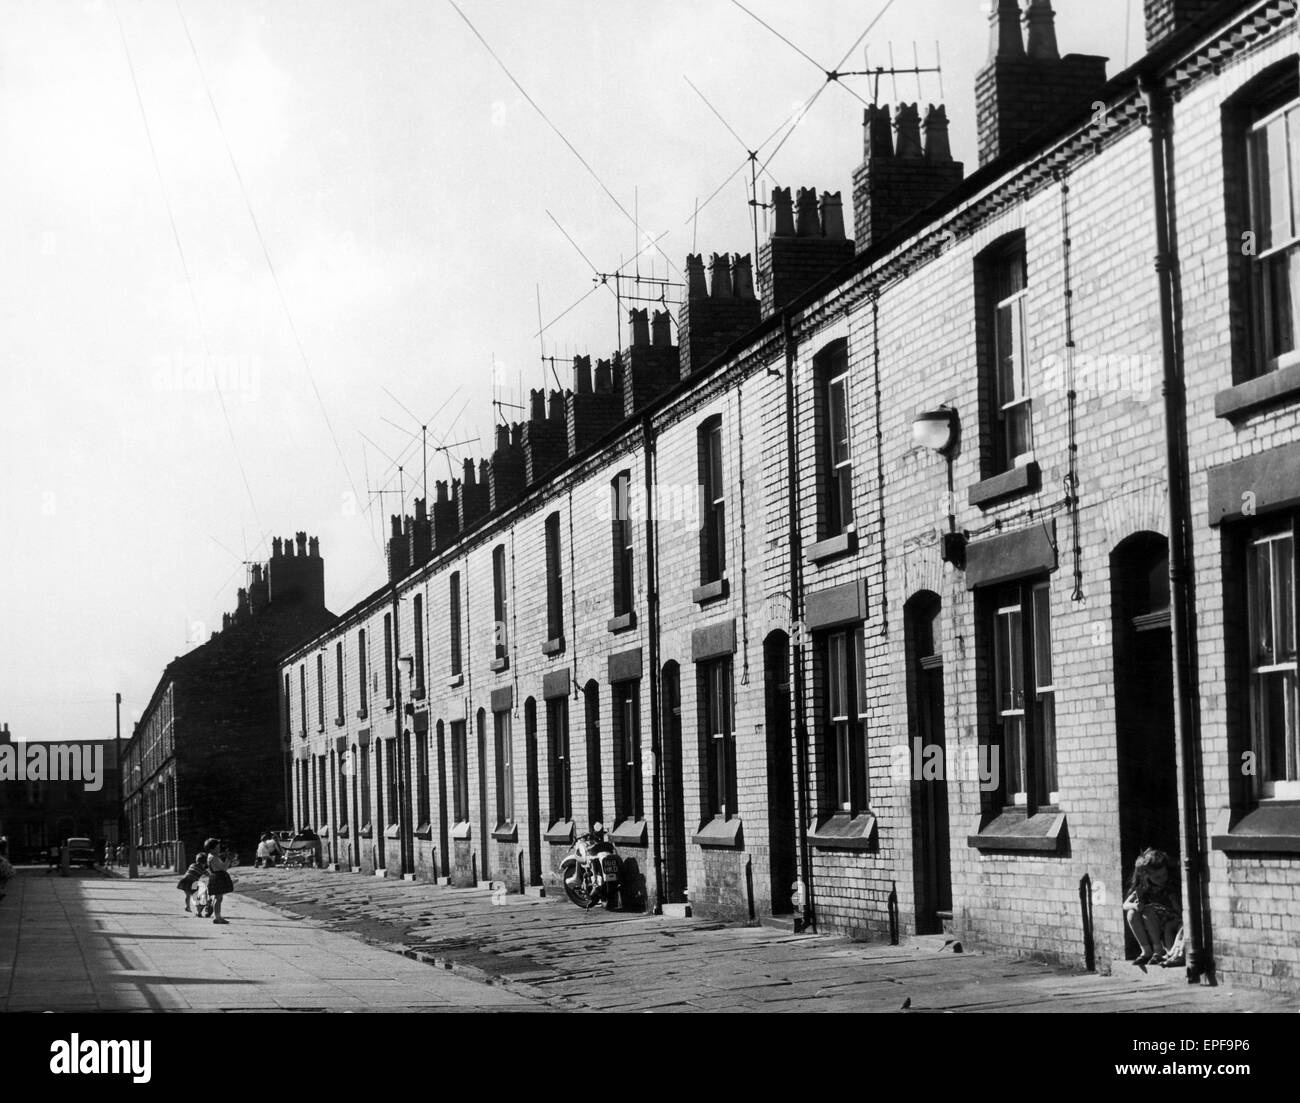 Admiral Grove, Liverpool, Merseyside. No. 10 Admiral Grove is the family home of Beatle Ringo Starr. July 1964. Stock Photo